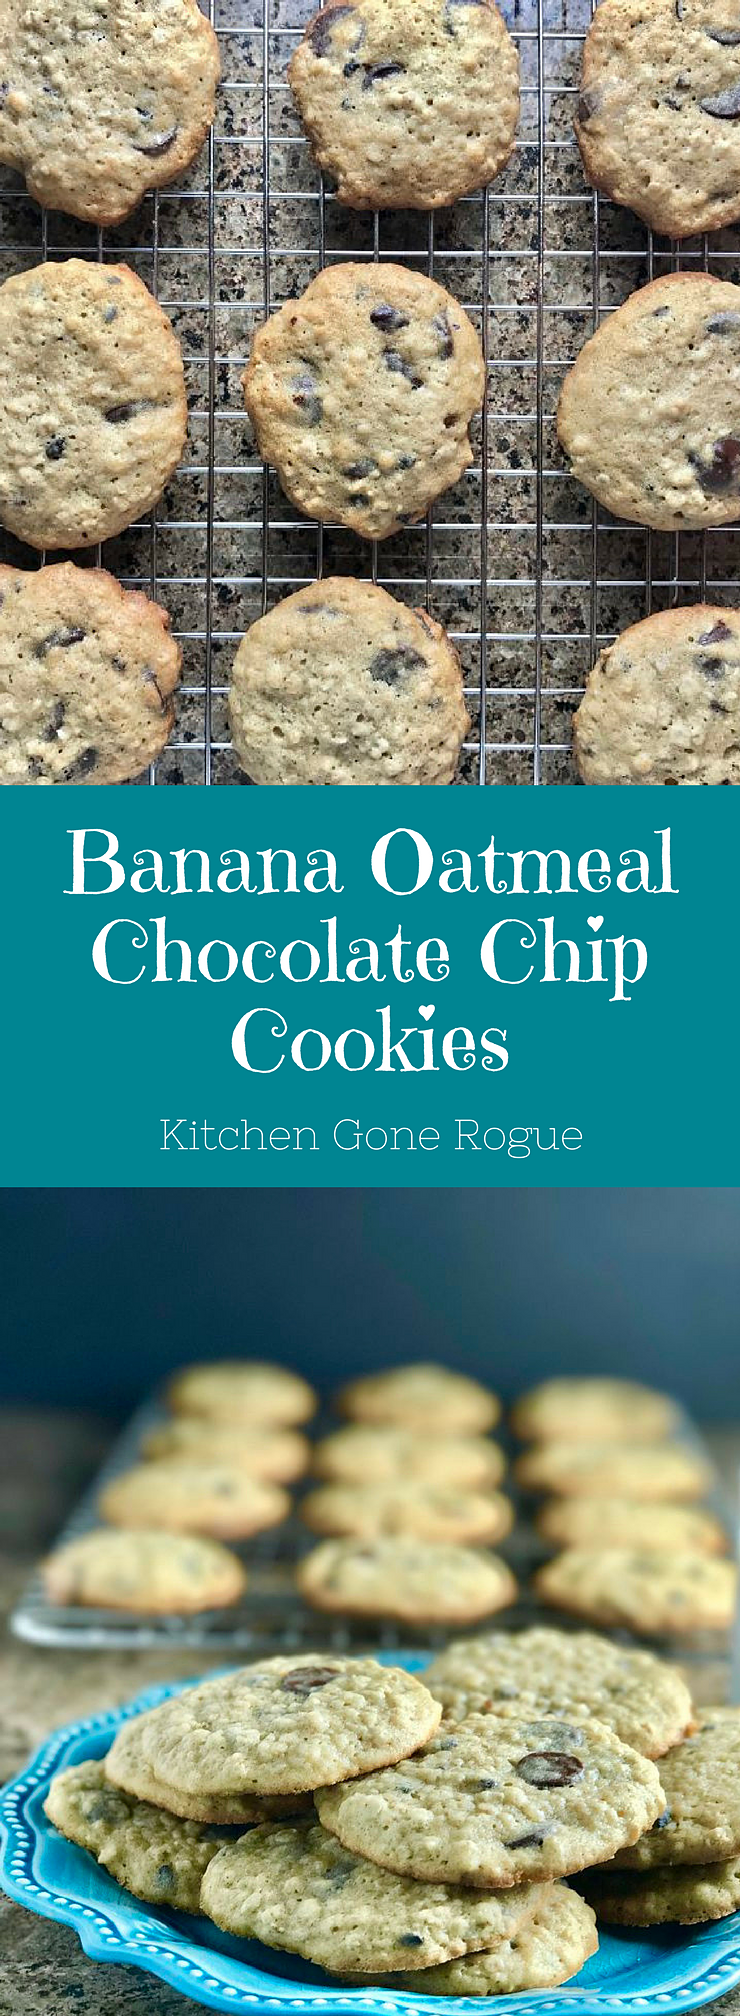 Banana Oatmeal Chocolate Chip Cookies Kitchen Gone Rogue